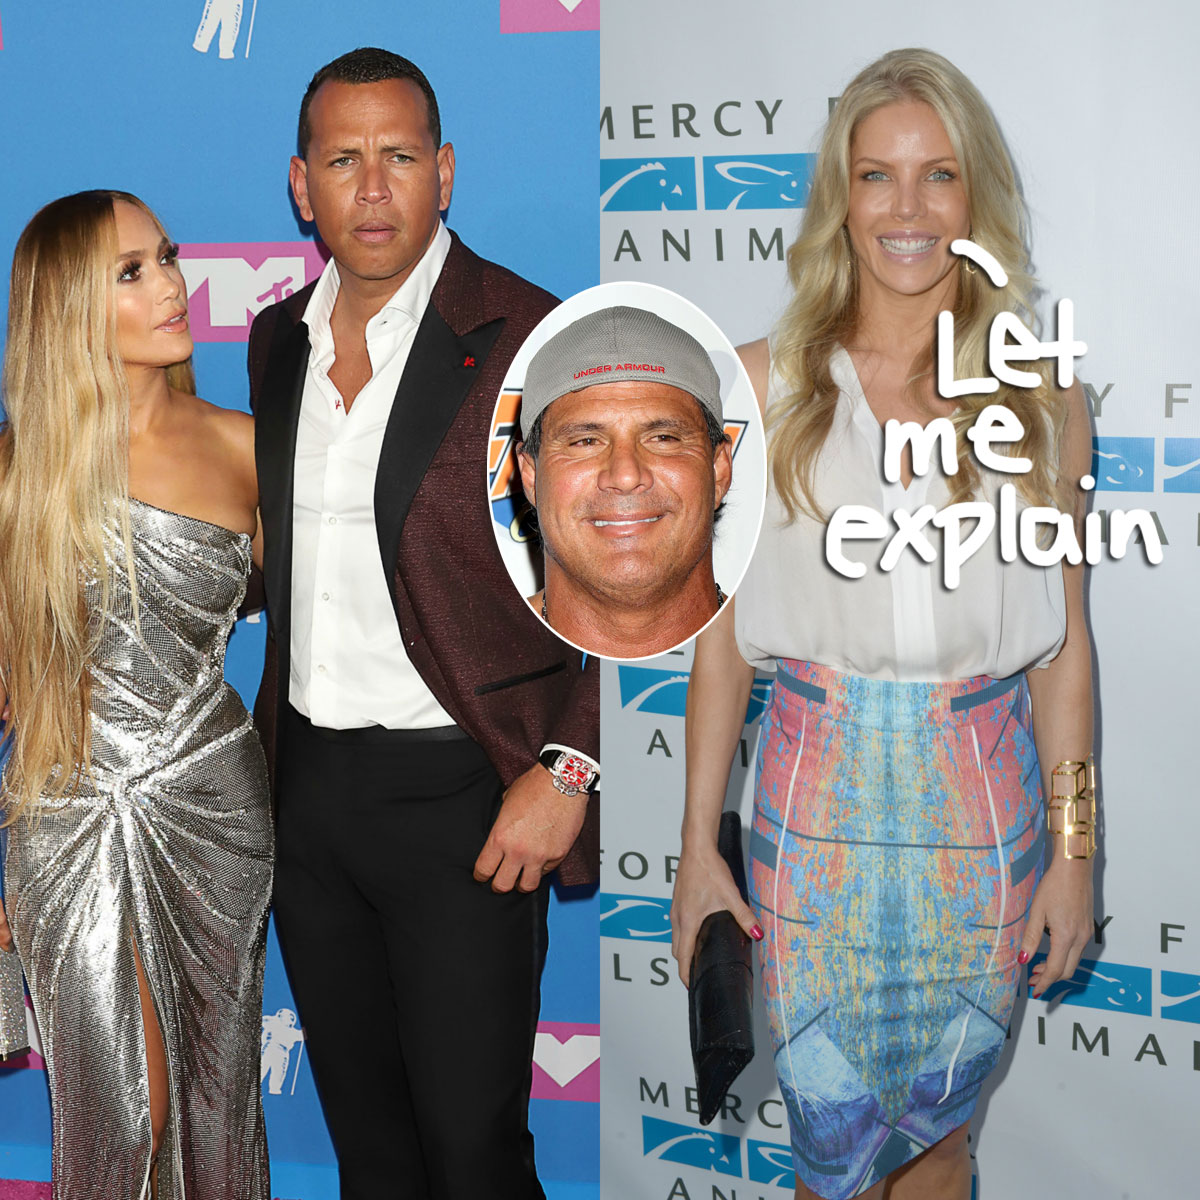 Jessica Canseco breaks silence on claims made by Jose that she has